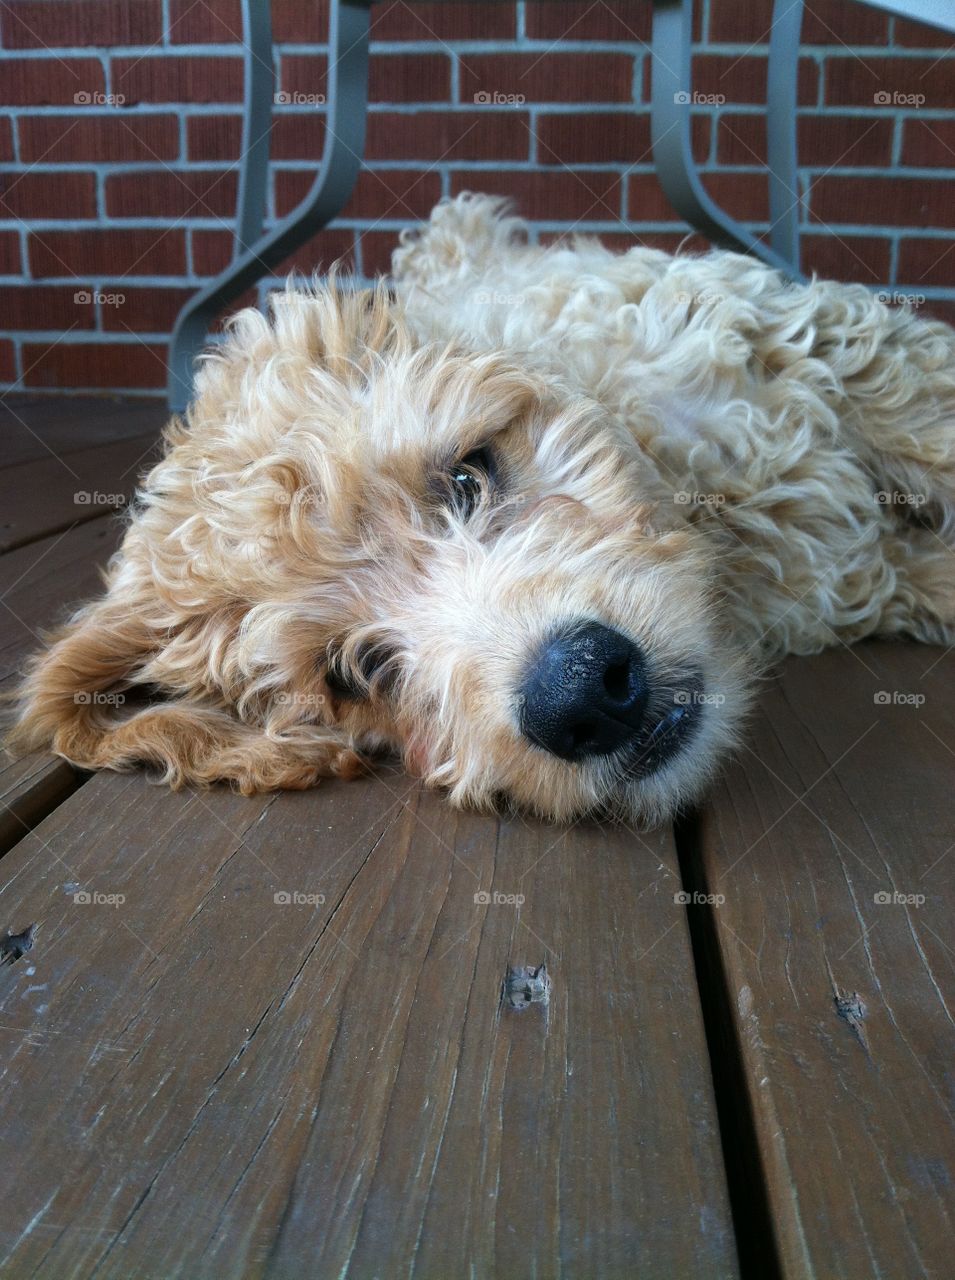 Goldendoodle. Dory the Doodle cooling off on the deck